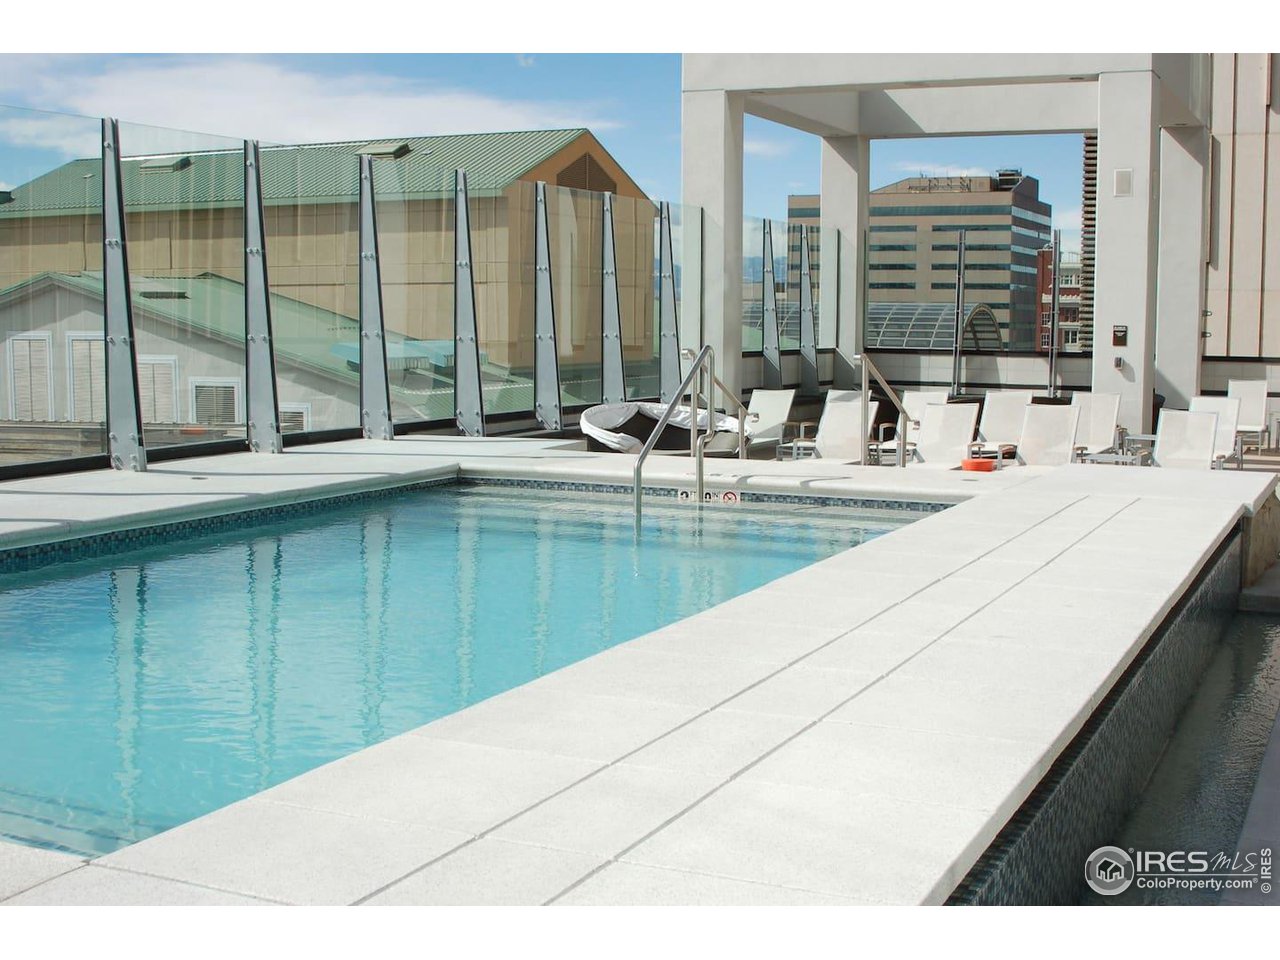 Spire Rooftop year round pool